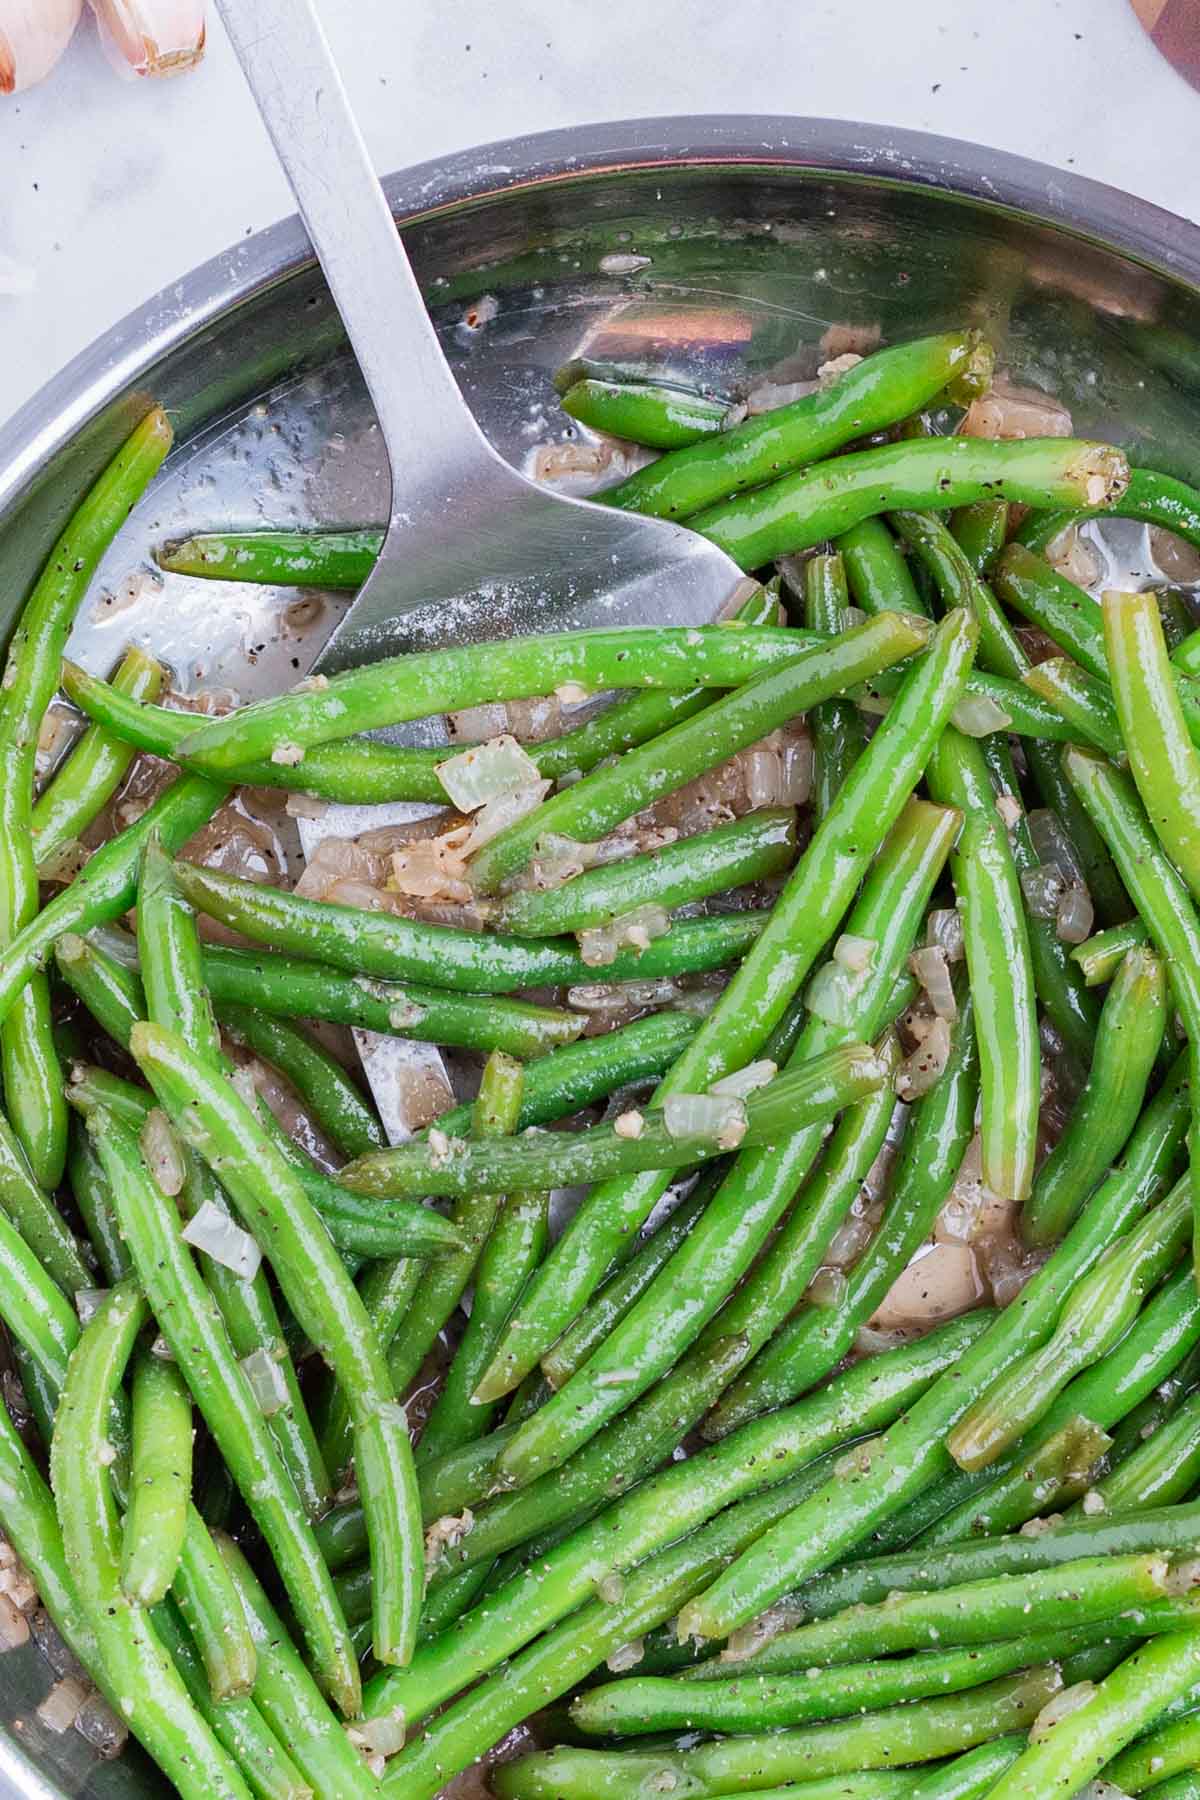 A spatula is used to pick up green beans from a skillet.